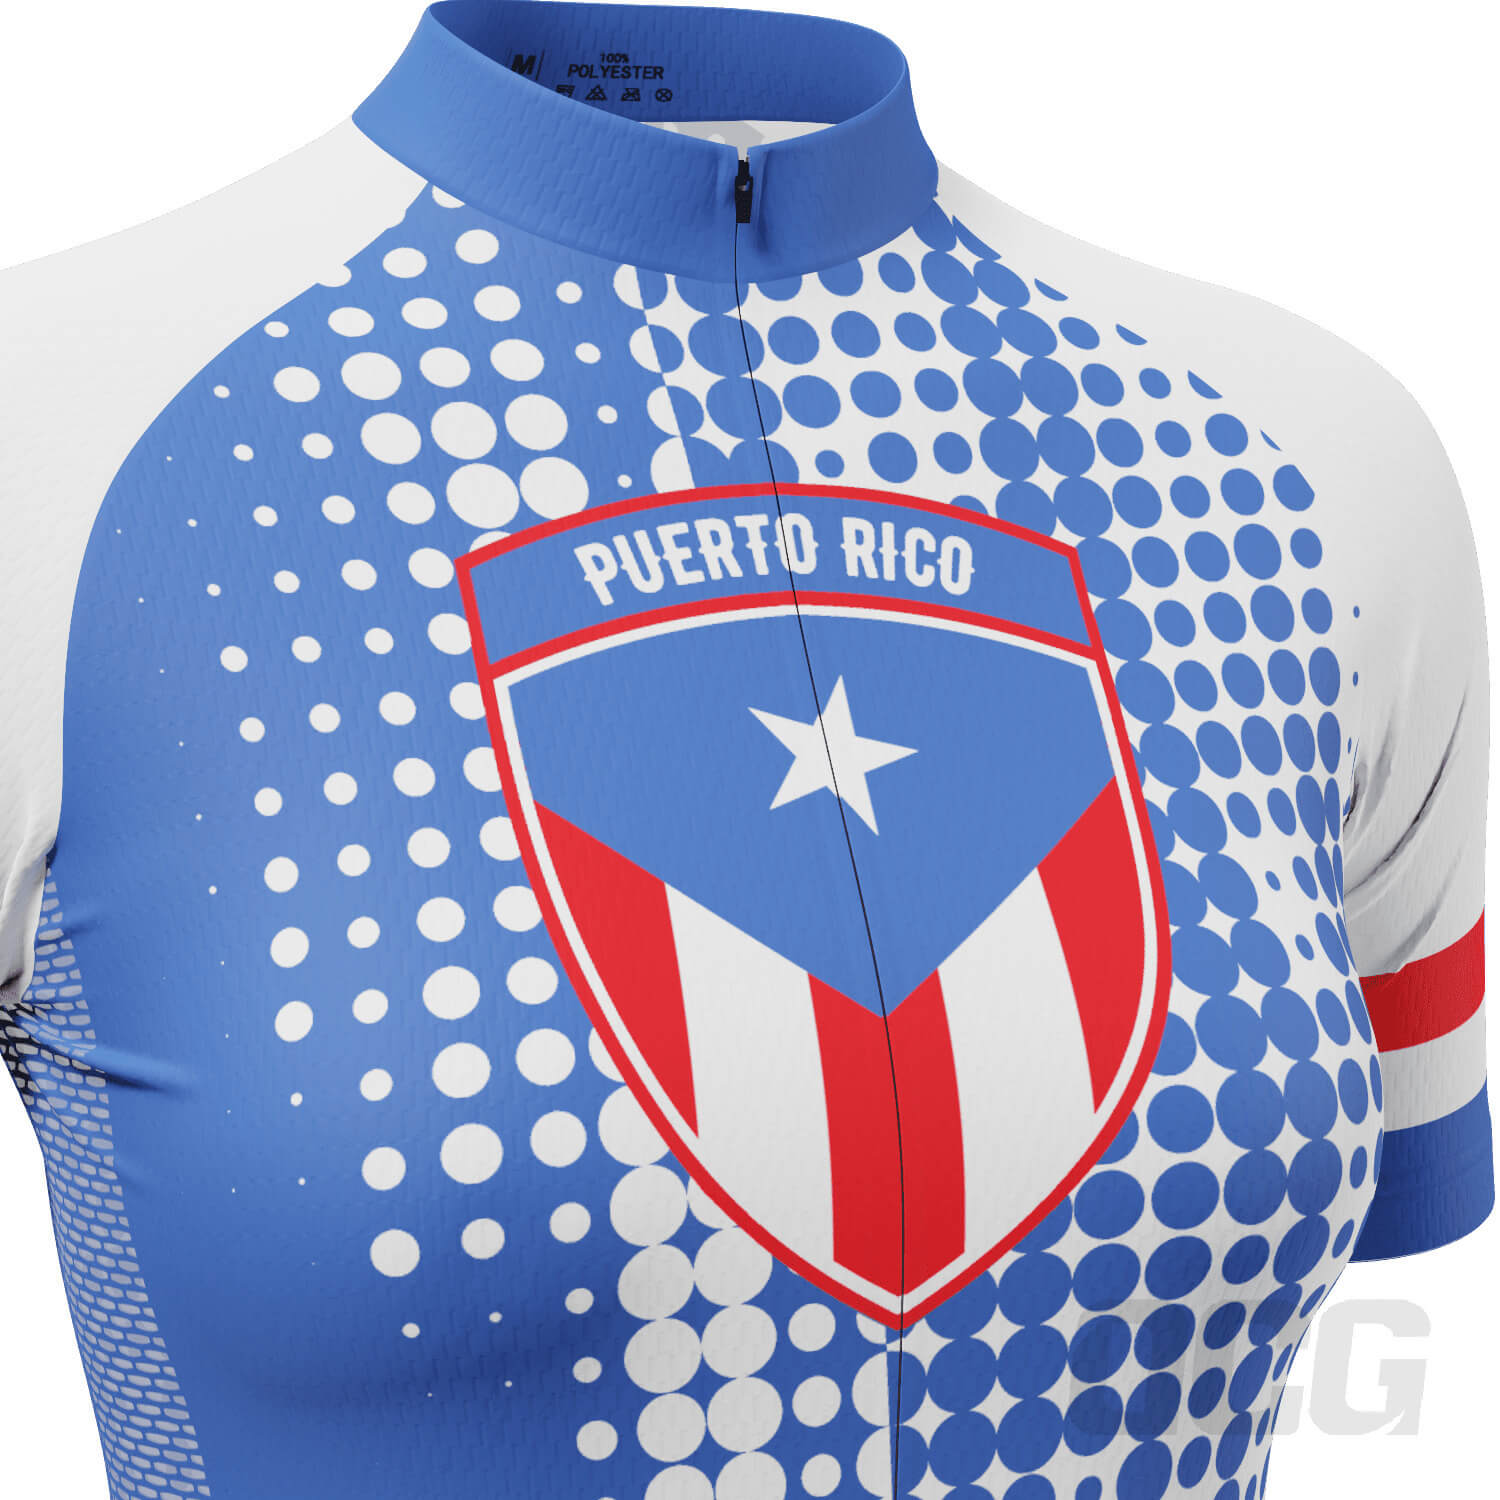 Women's Puerto Rico National Flag Short Sleeve Cycling Jersey